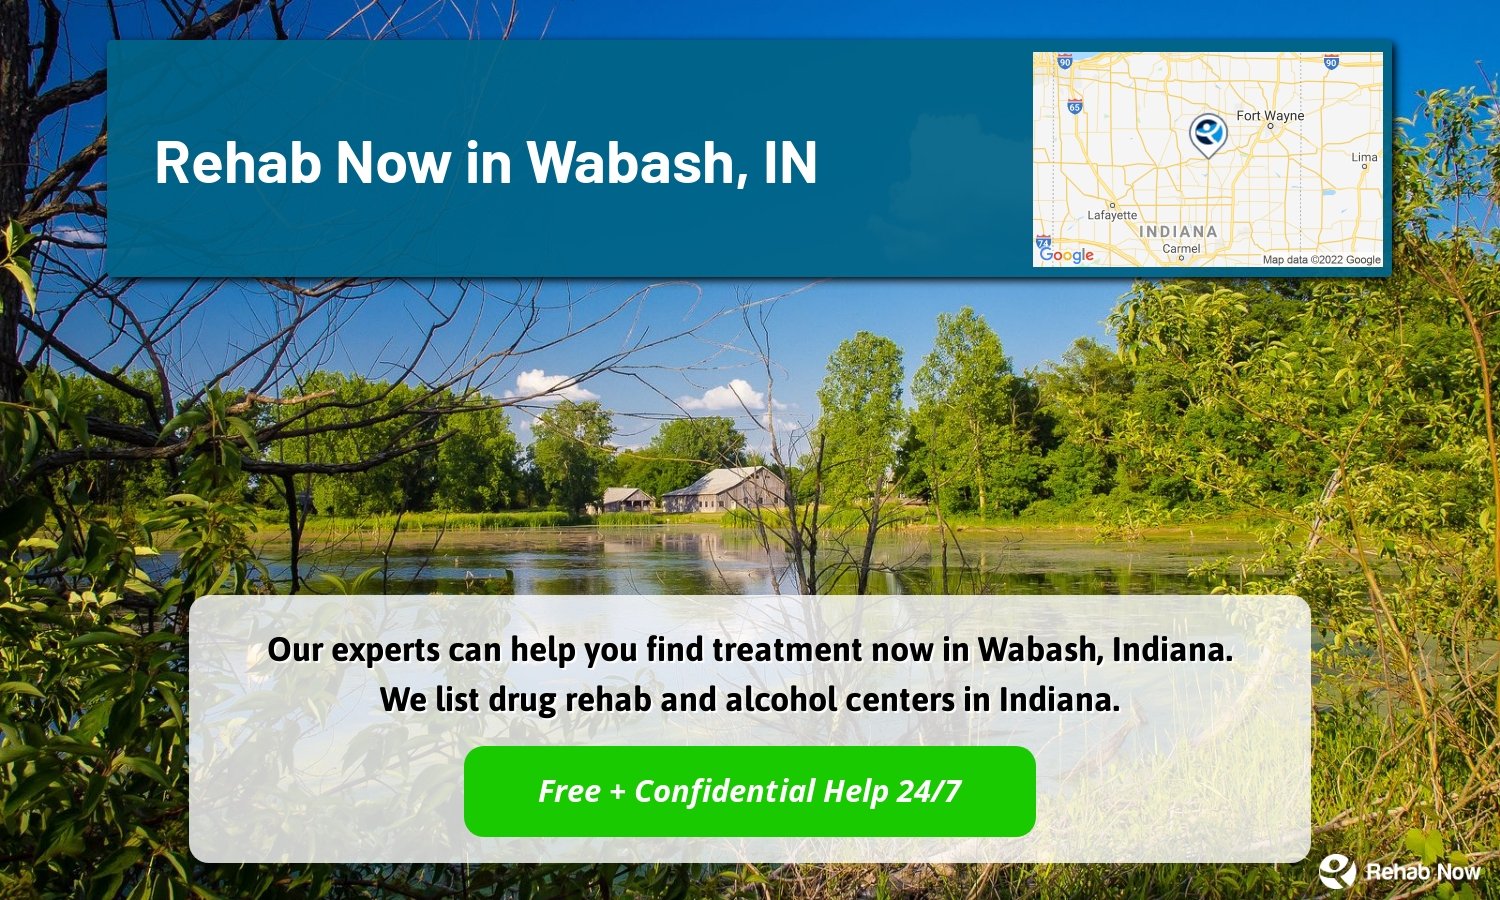 Our experts can help you find treatment now in Wabash, Indiana. We list drug rehab and alcohol centers in Indiana.